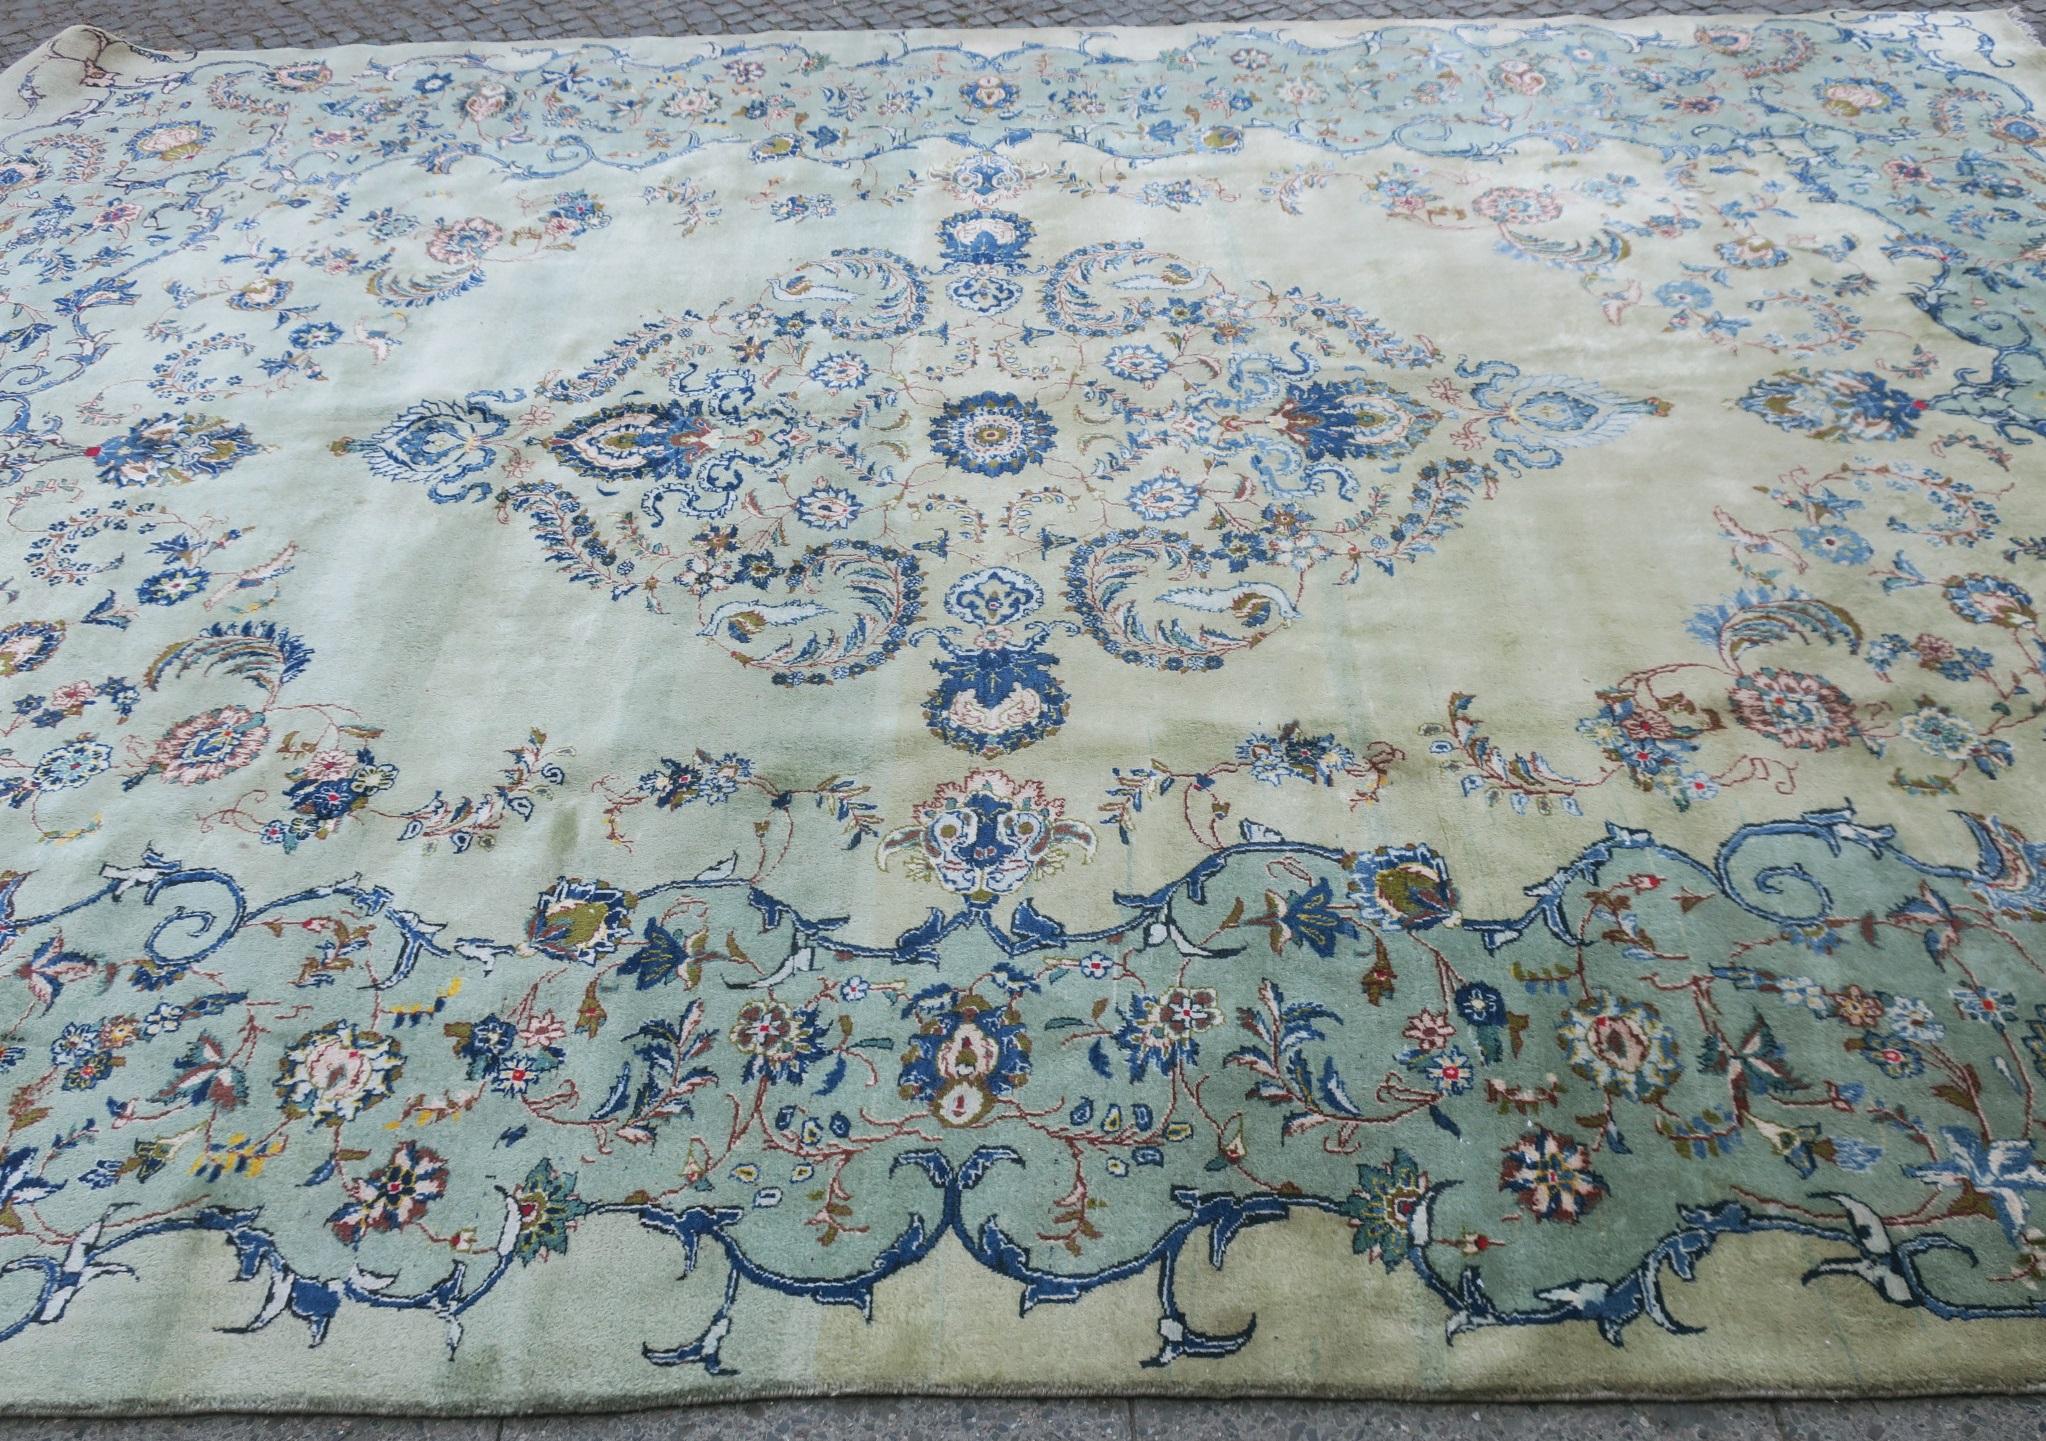 Large Pistachio Kashan carpet from circa 1950-1970 made with lustrous high quality wool and subtly shaded light pistachio background color framed by a slightly darker pistachio surround.
Very good pile all-over.
The rug has been professionally